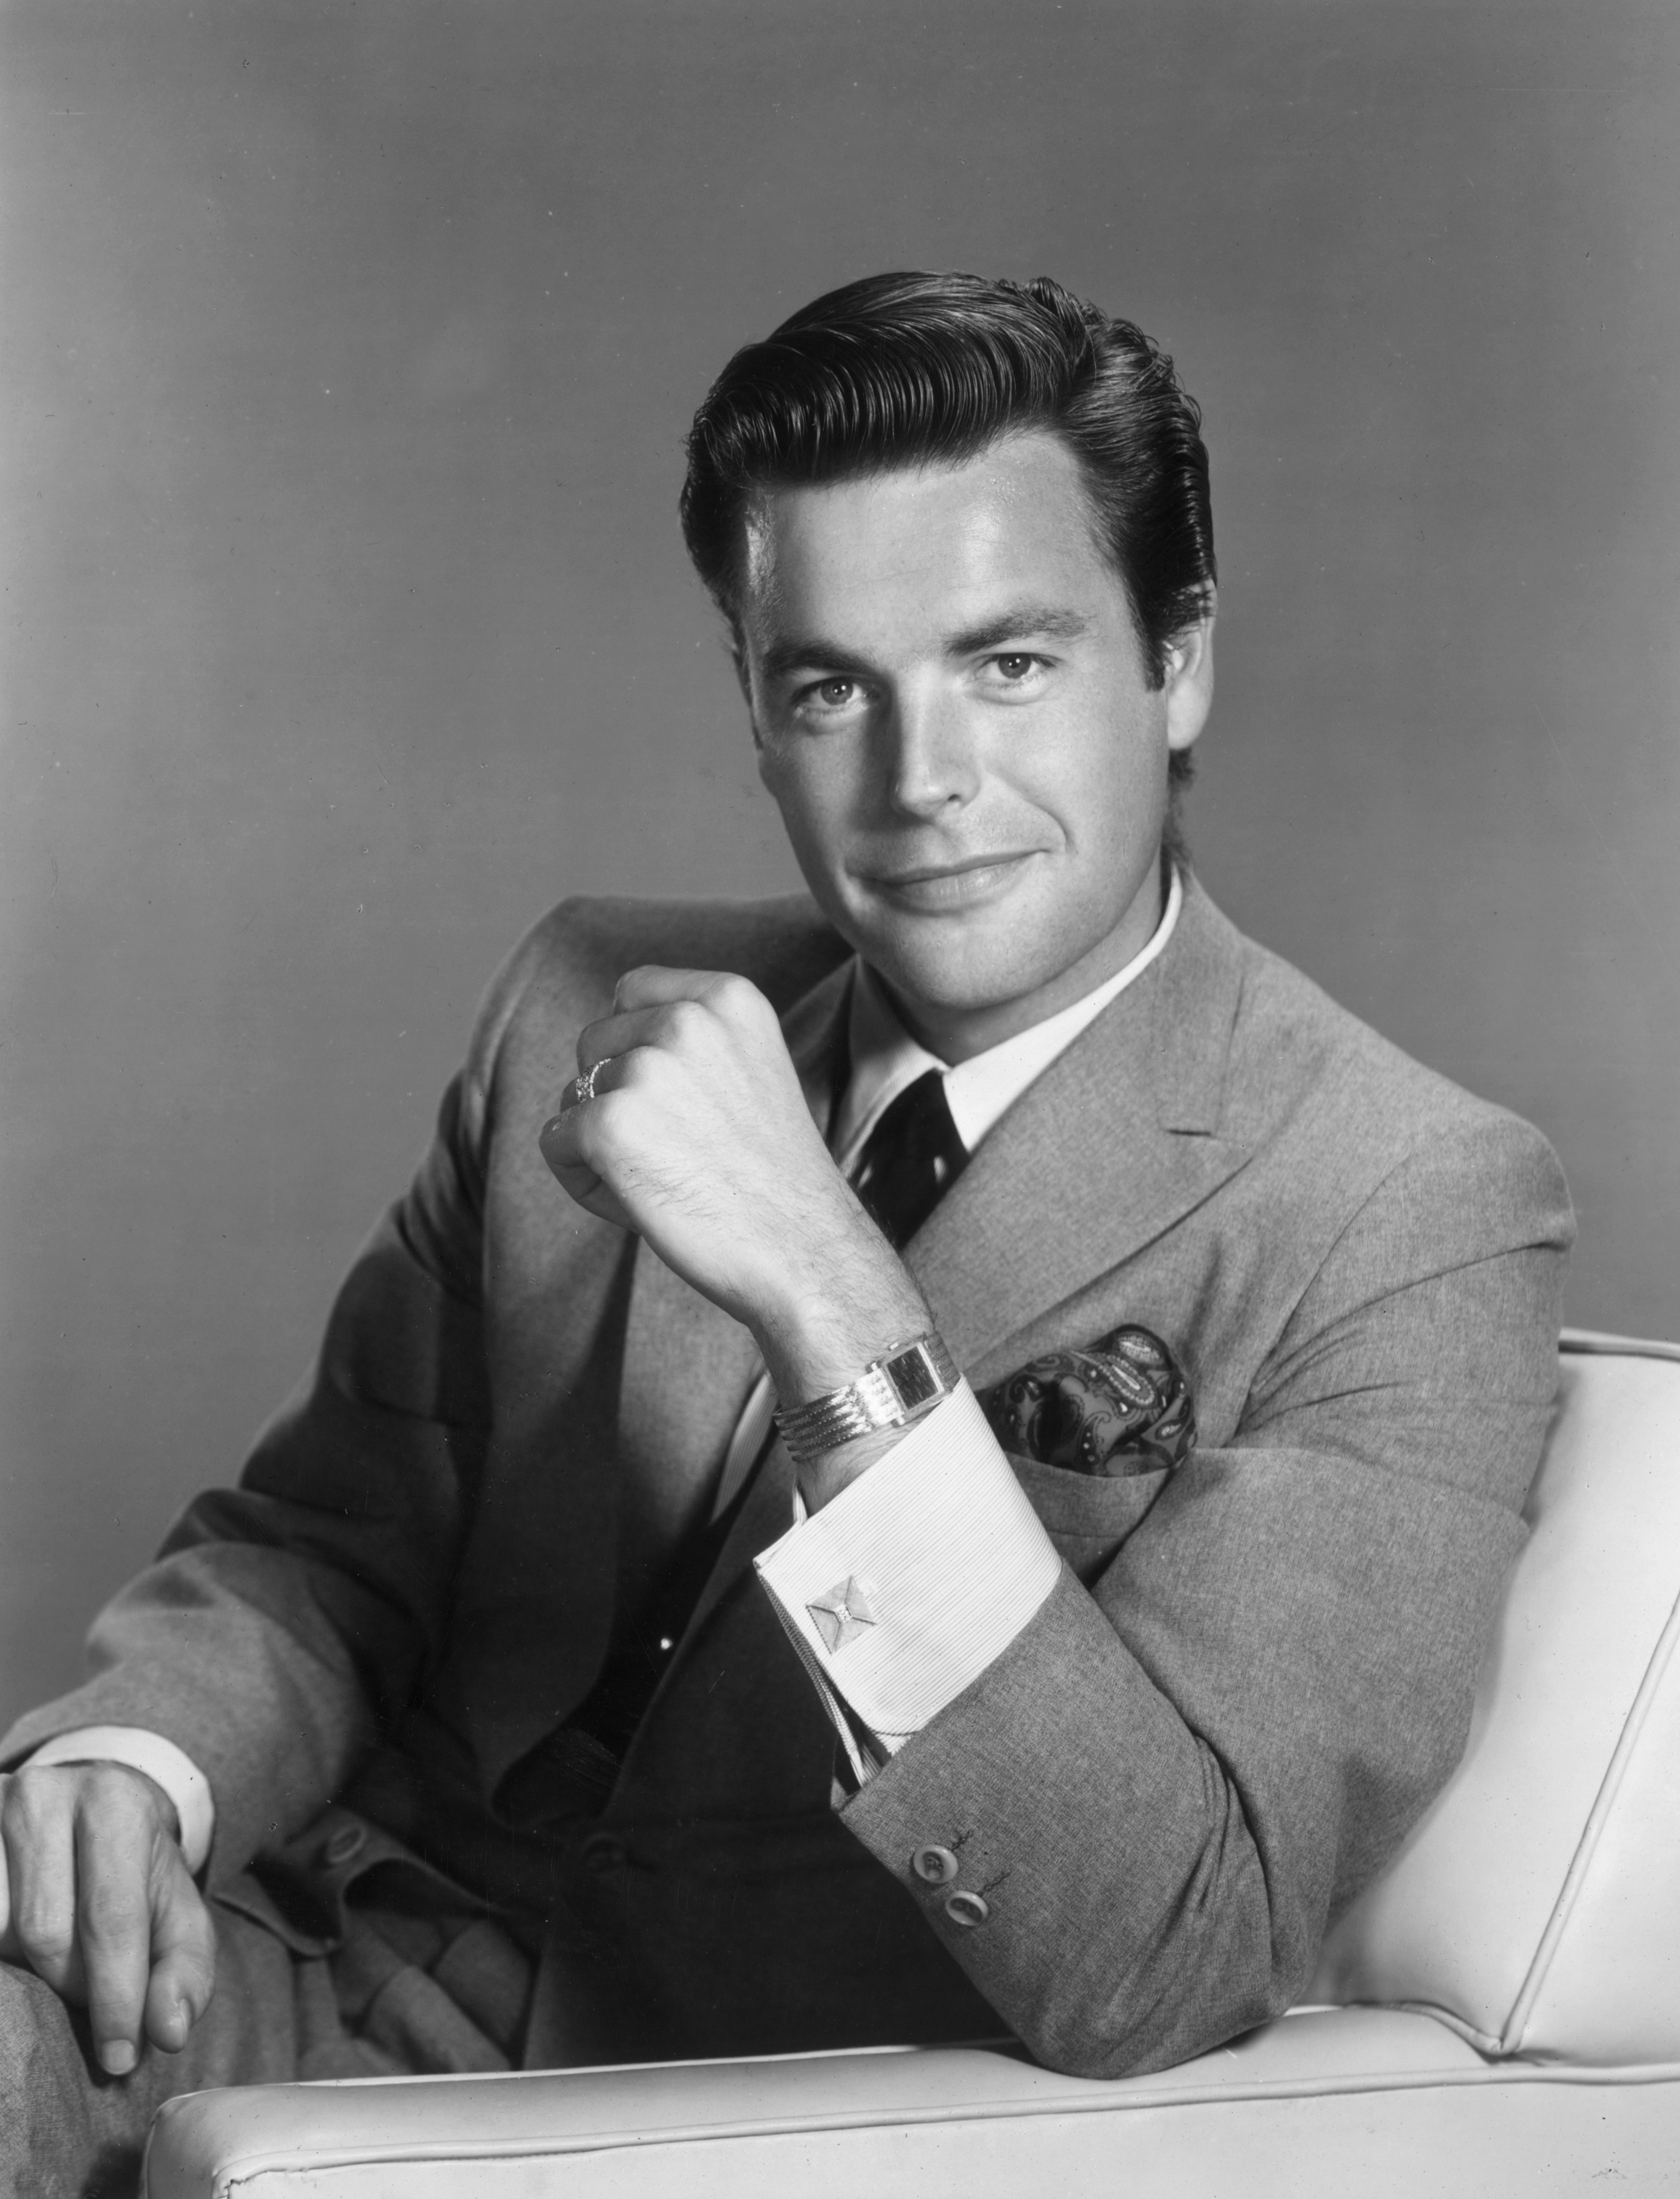 1960: American actor Robert Wagner in a promotional portrait for director Michael Anderson's film, "All the Fine Young Cannibals." | Source: Getty Images